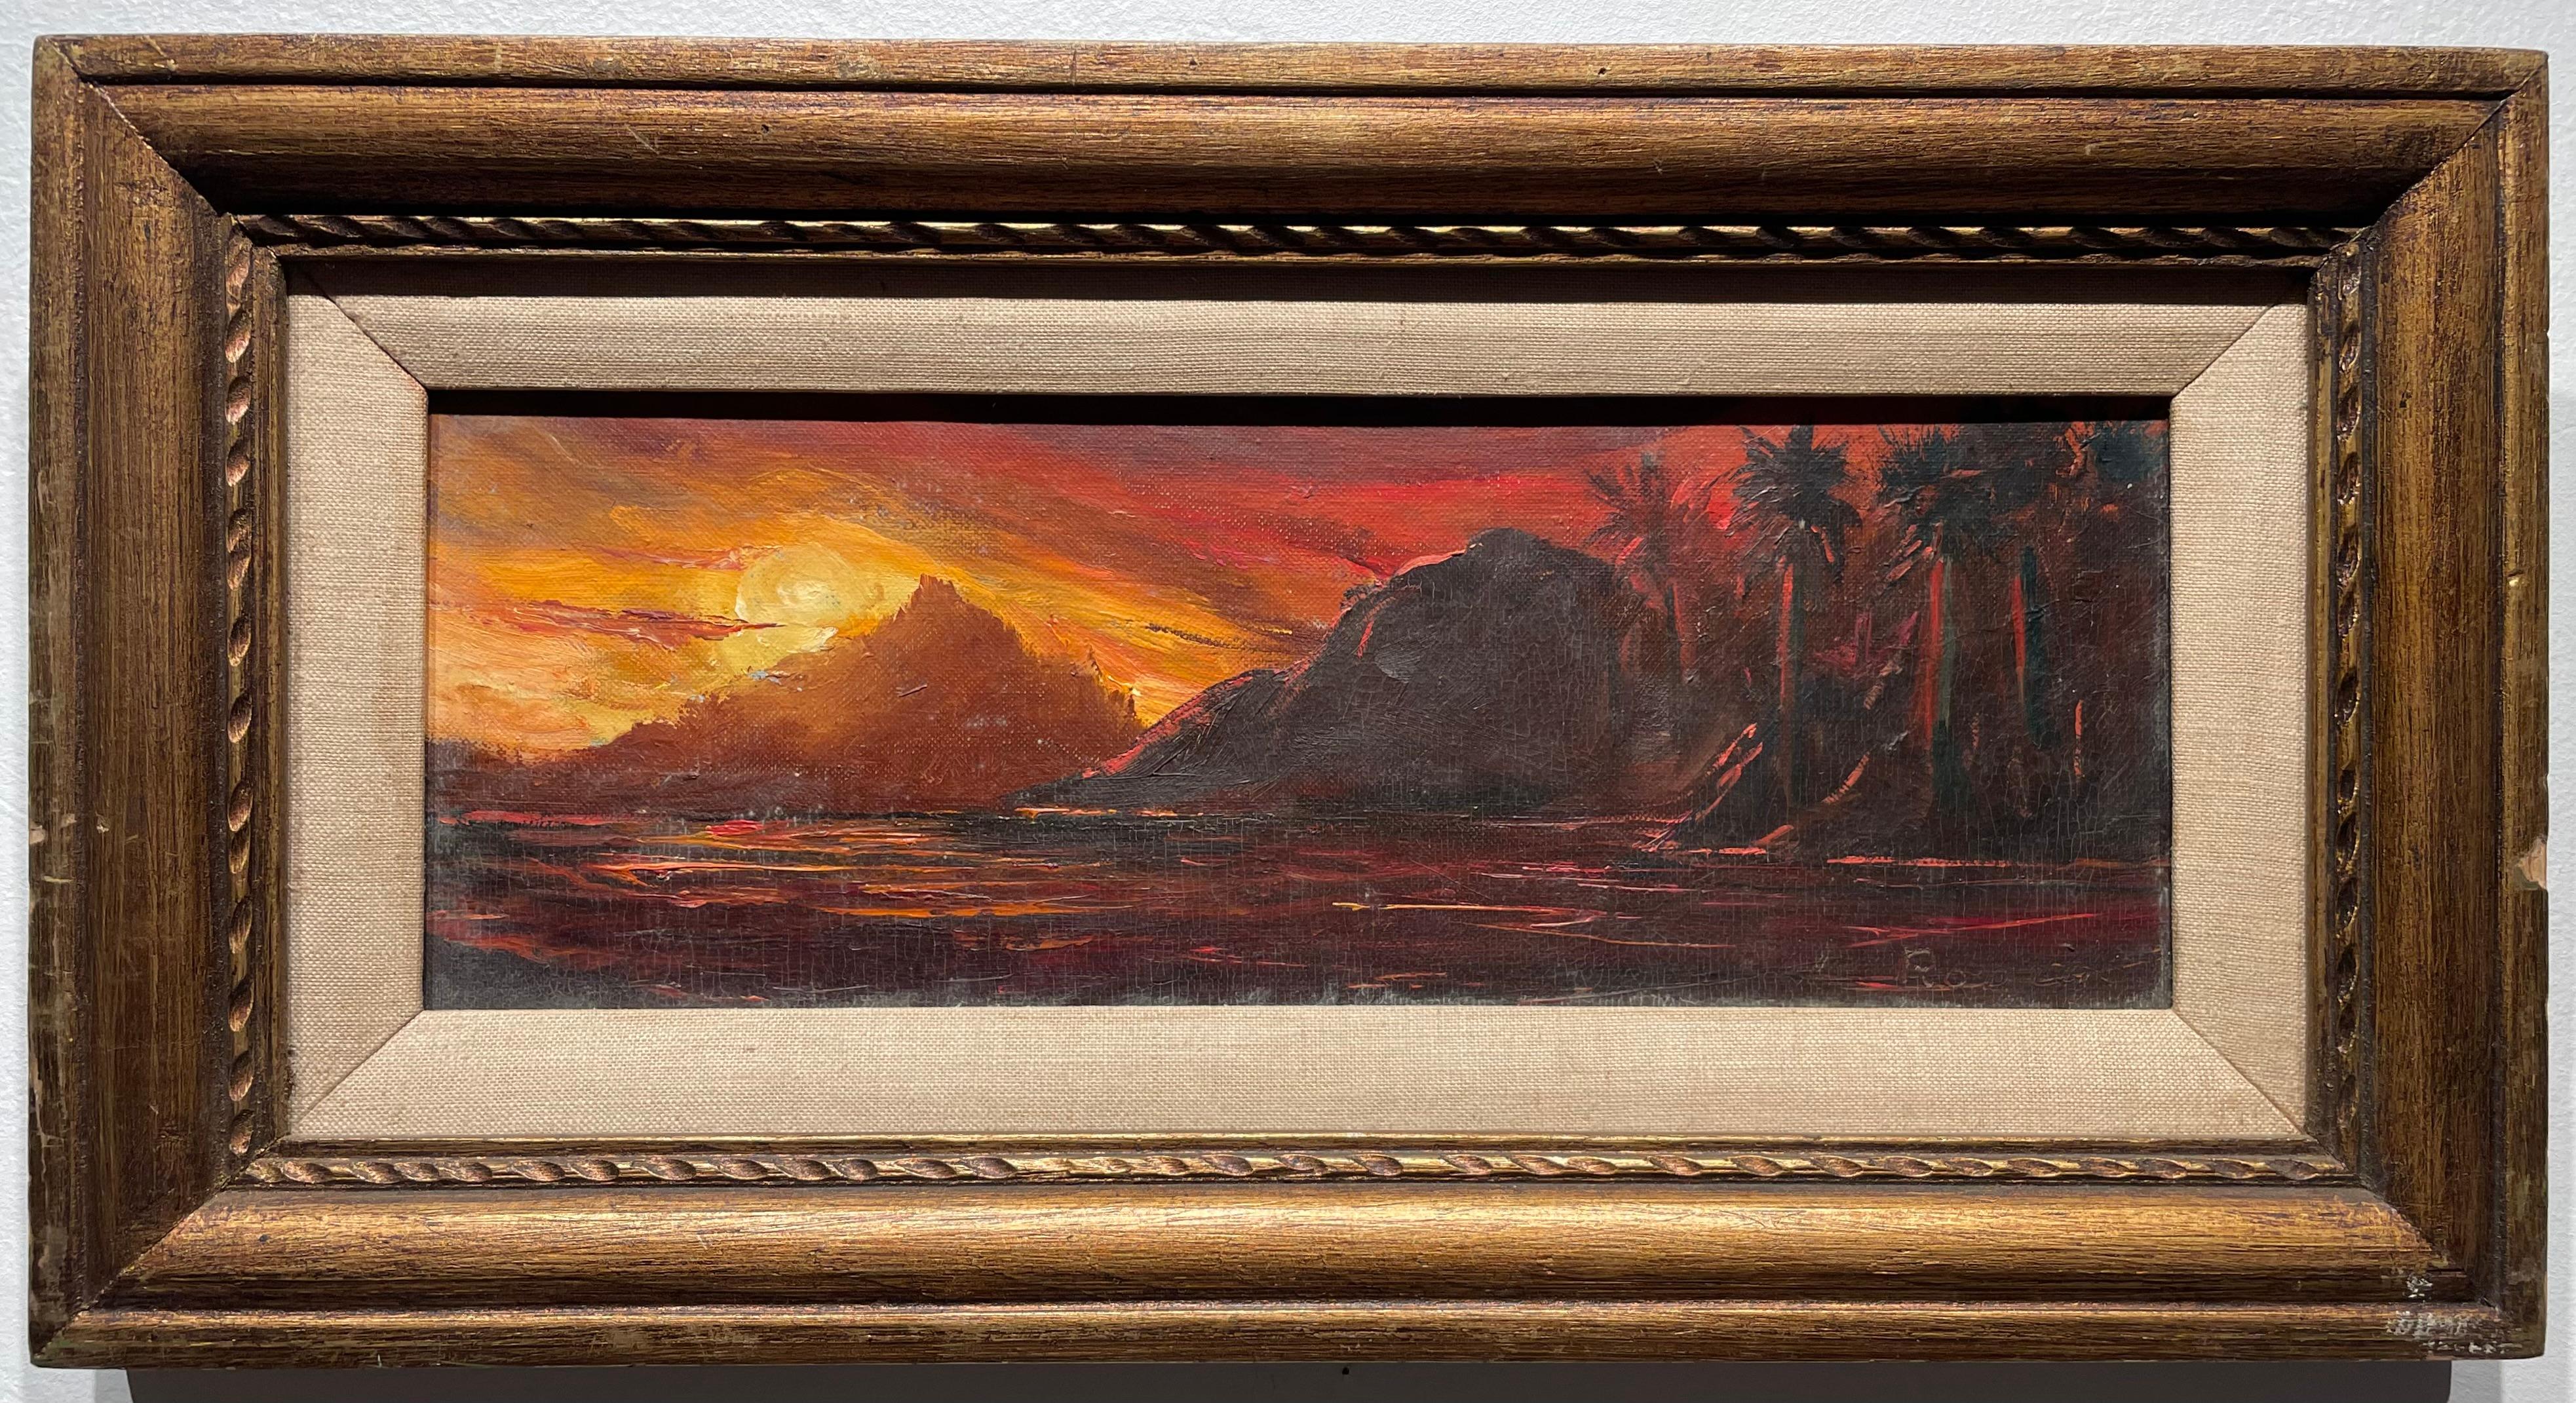 Unknown Abstract Painting - Vintage Tropical Sunset Landscape Oil Painting Signed Framed Original 